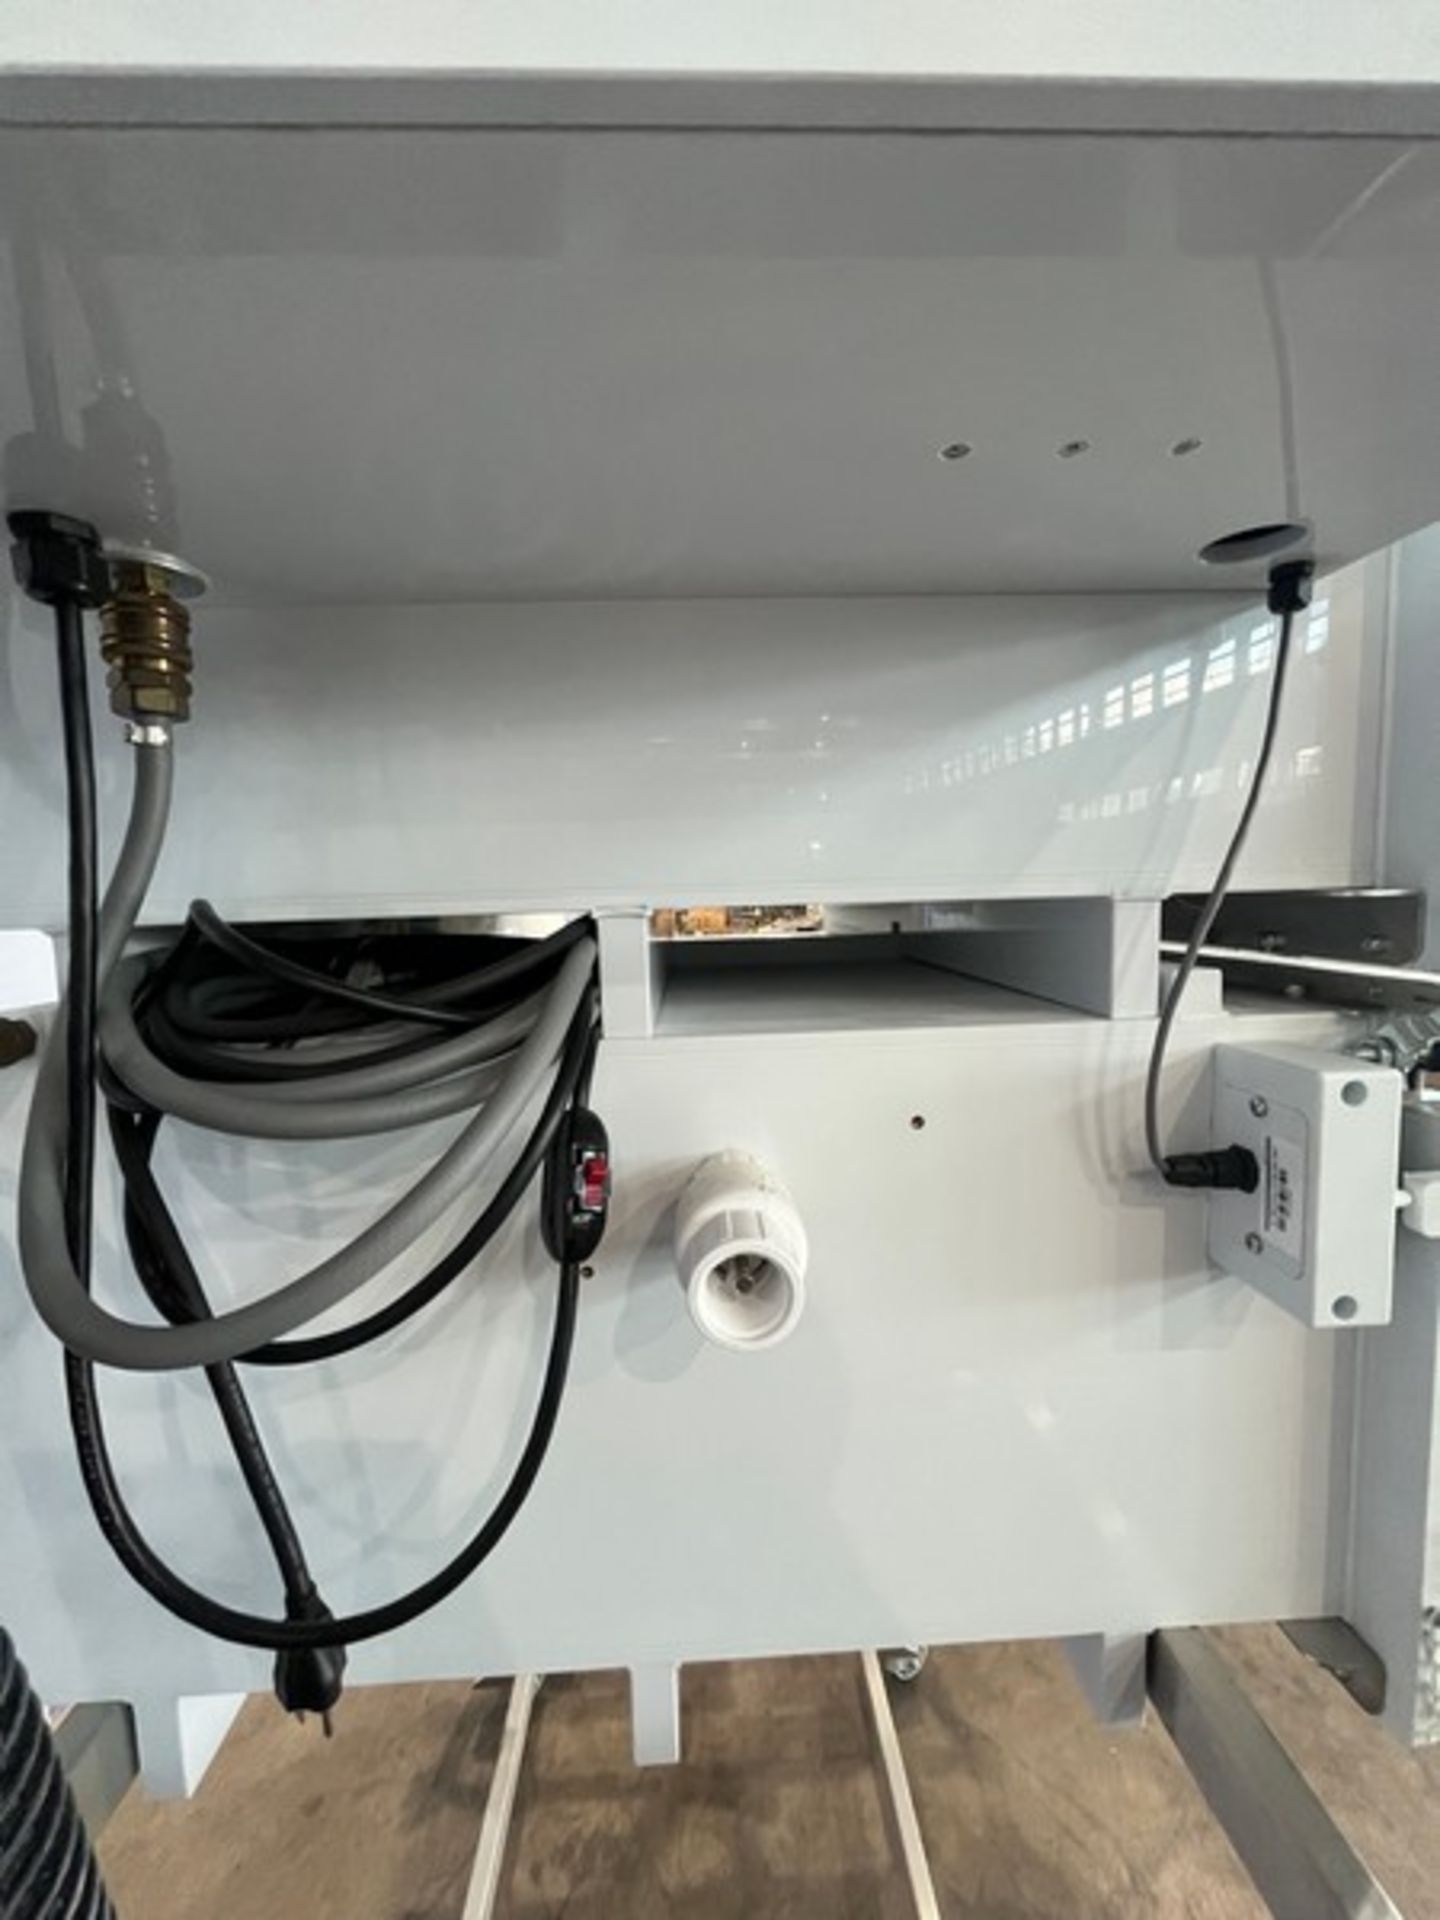 Emission testing chamber system clear acylic box EMISSION TESTING CHAMBER SYSTEM CLEAR ACYLIC BOX ( - Image 8 of 10